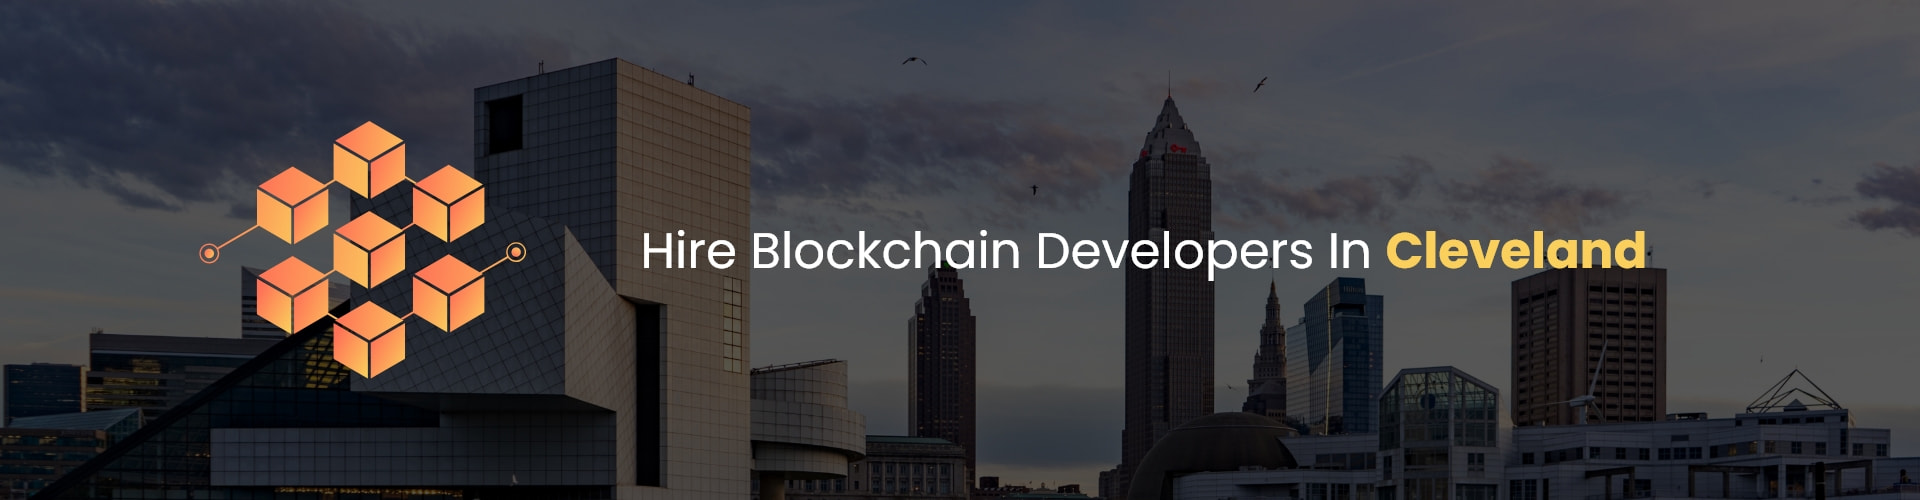 hire blockchain developers in cleveland